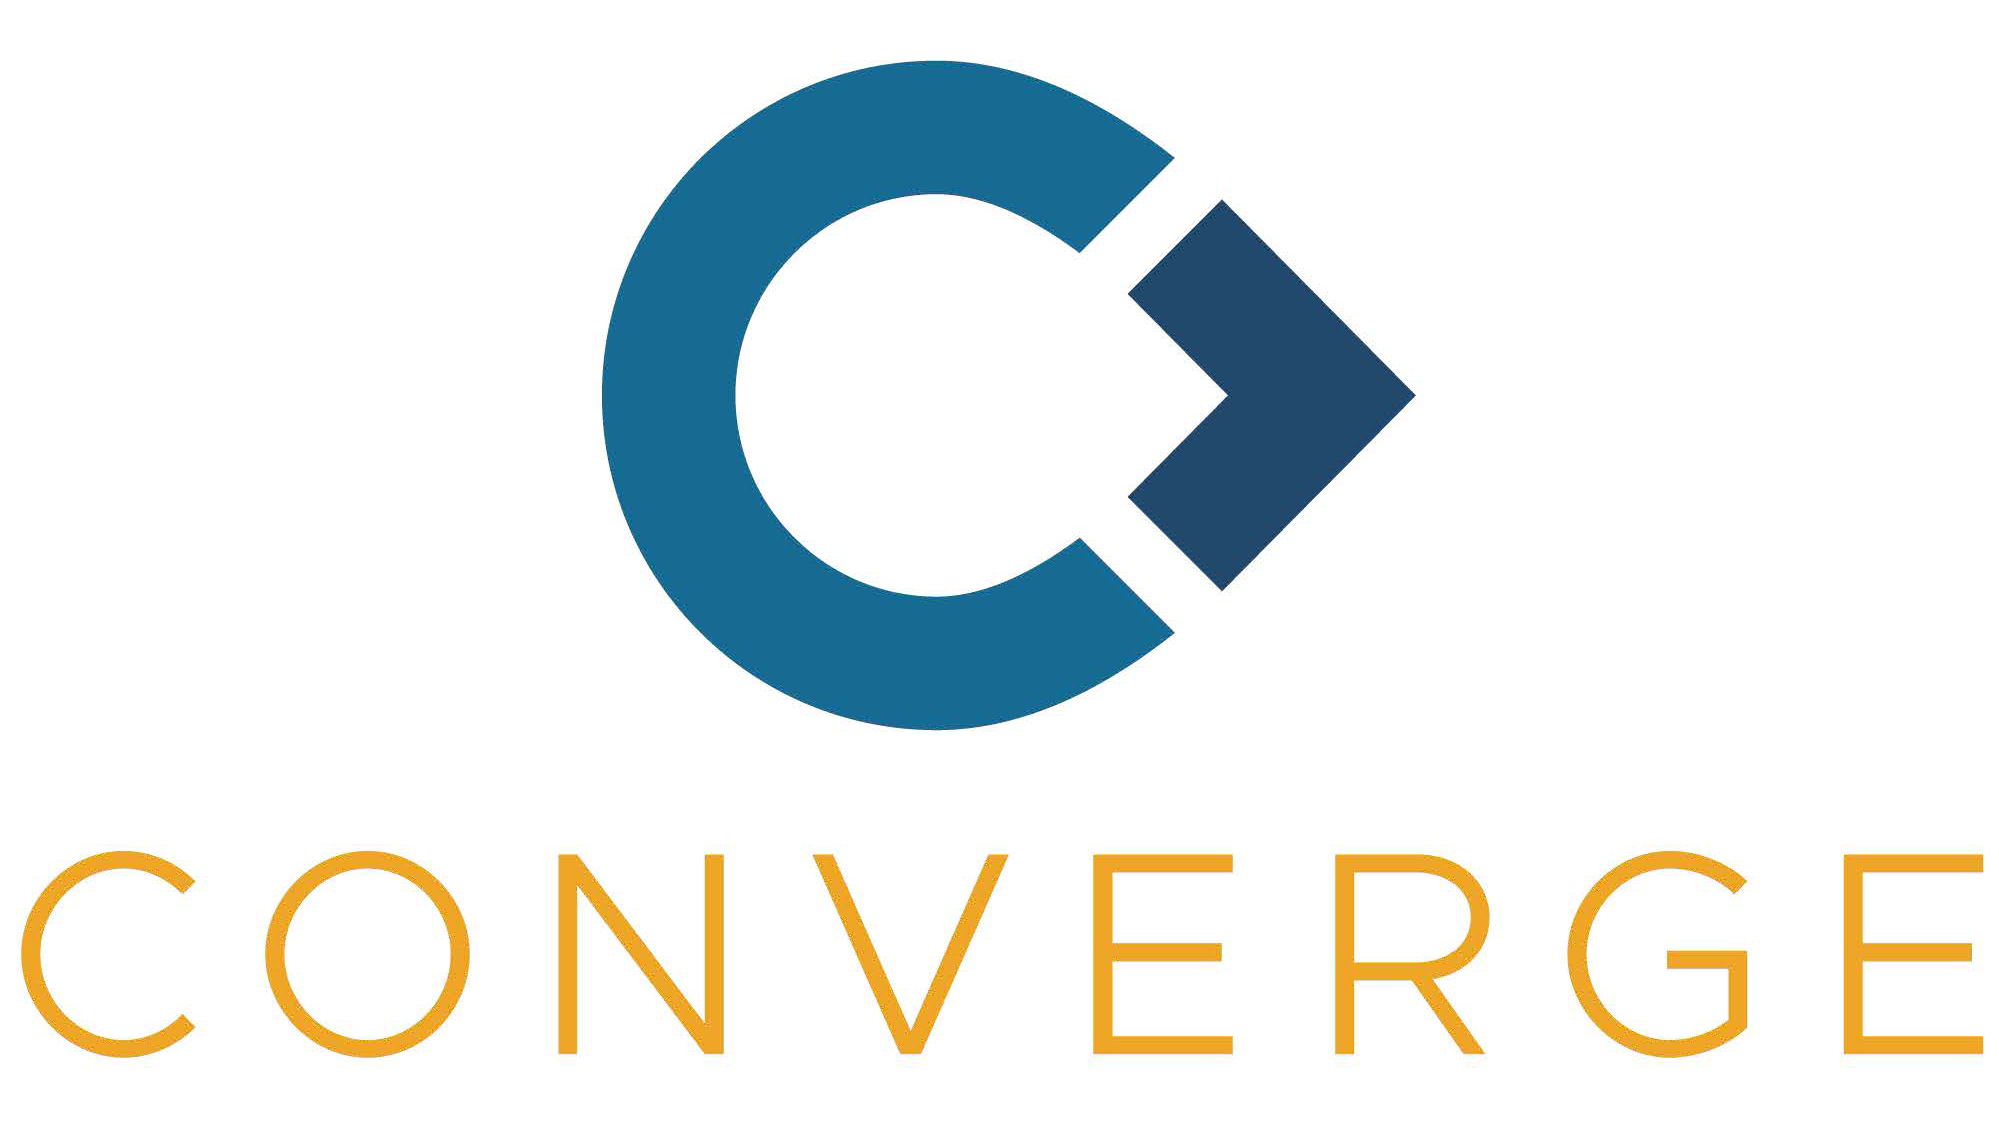 Converge 2018 conference at the Georgia Tech Hotel and Conference Center September 10.